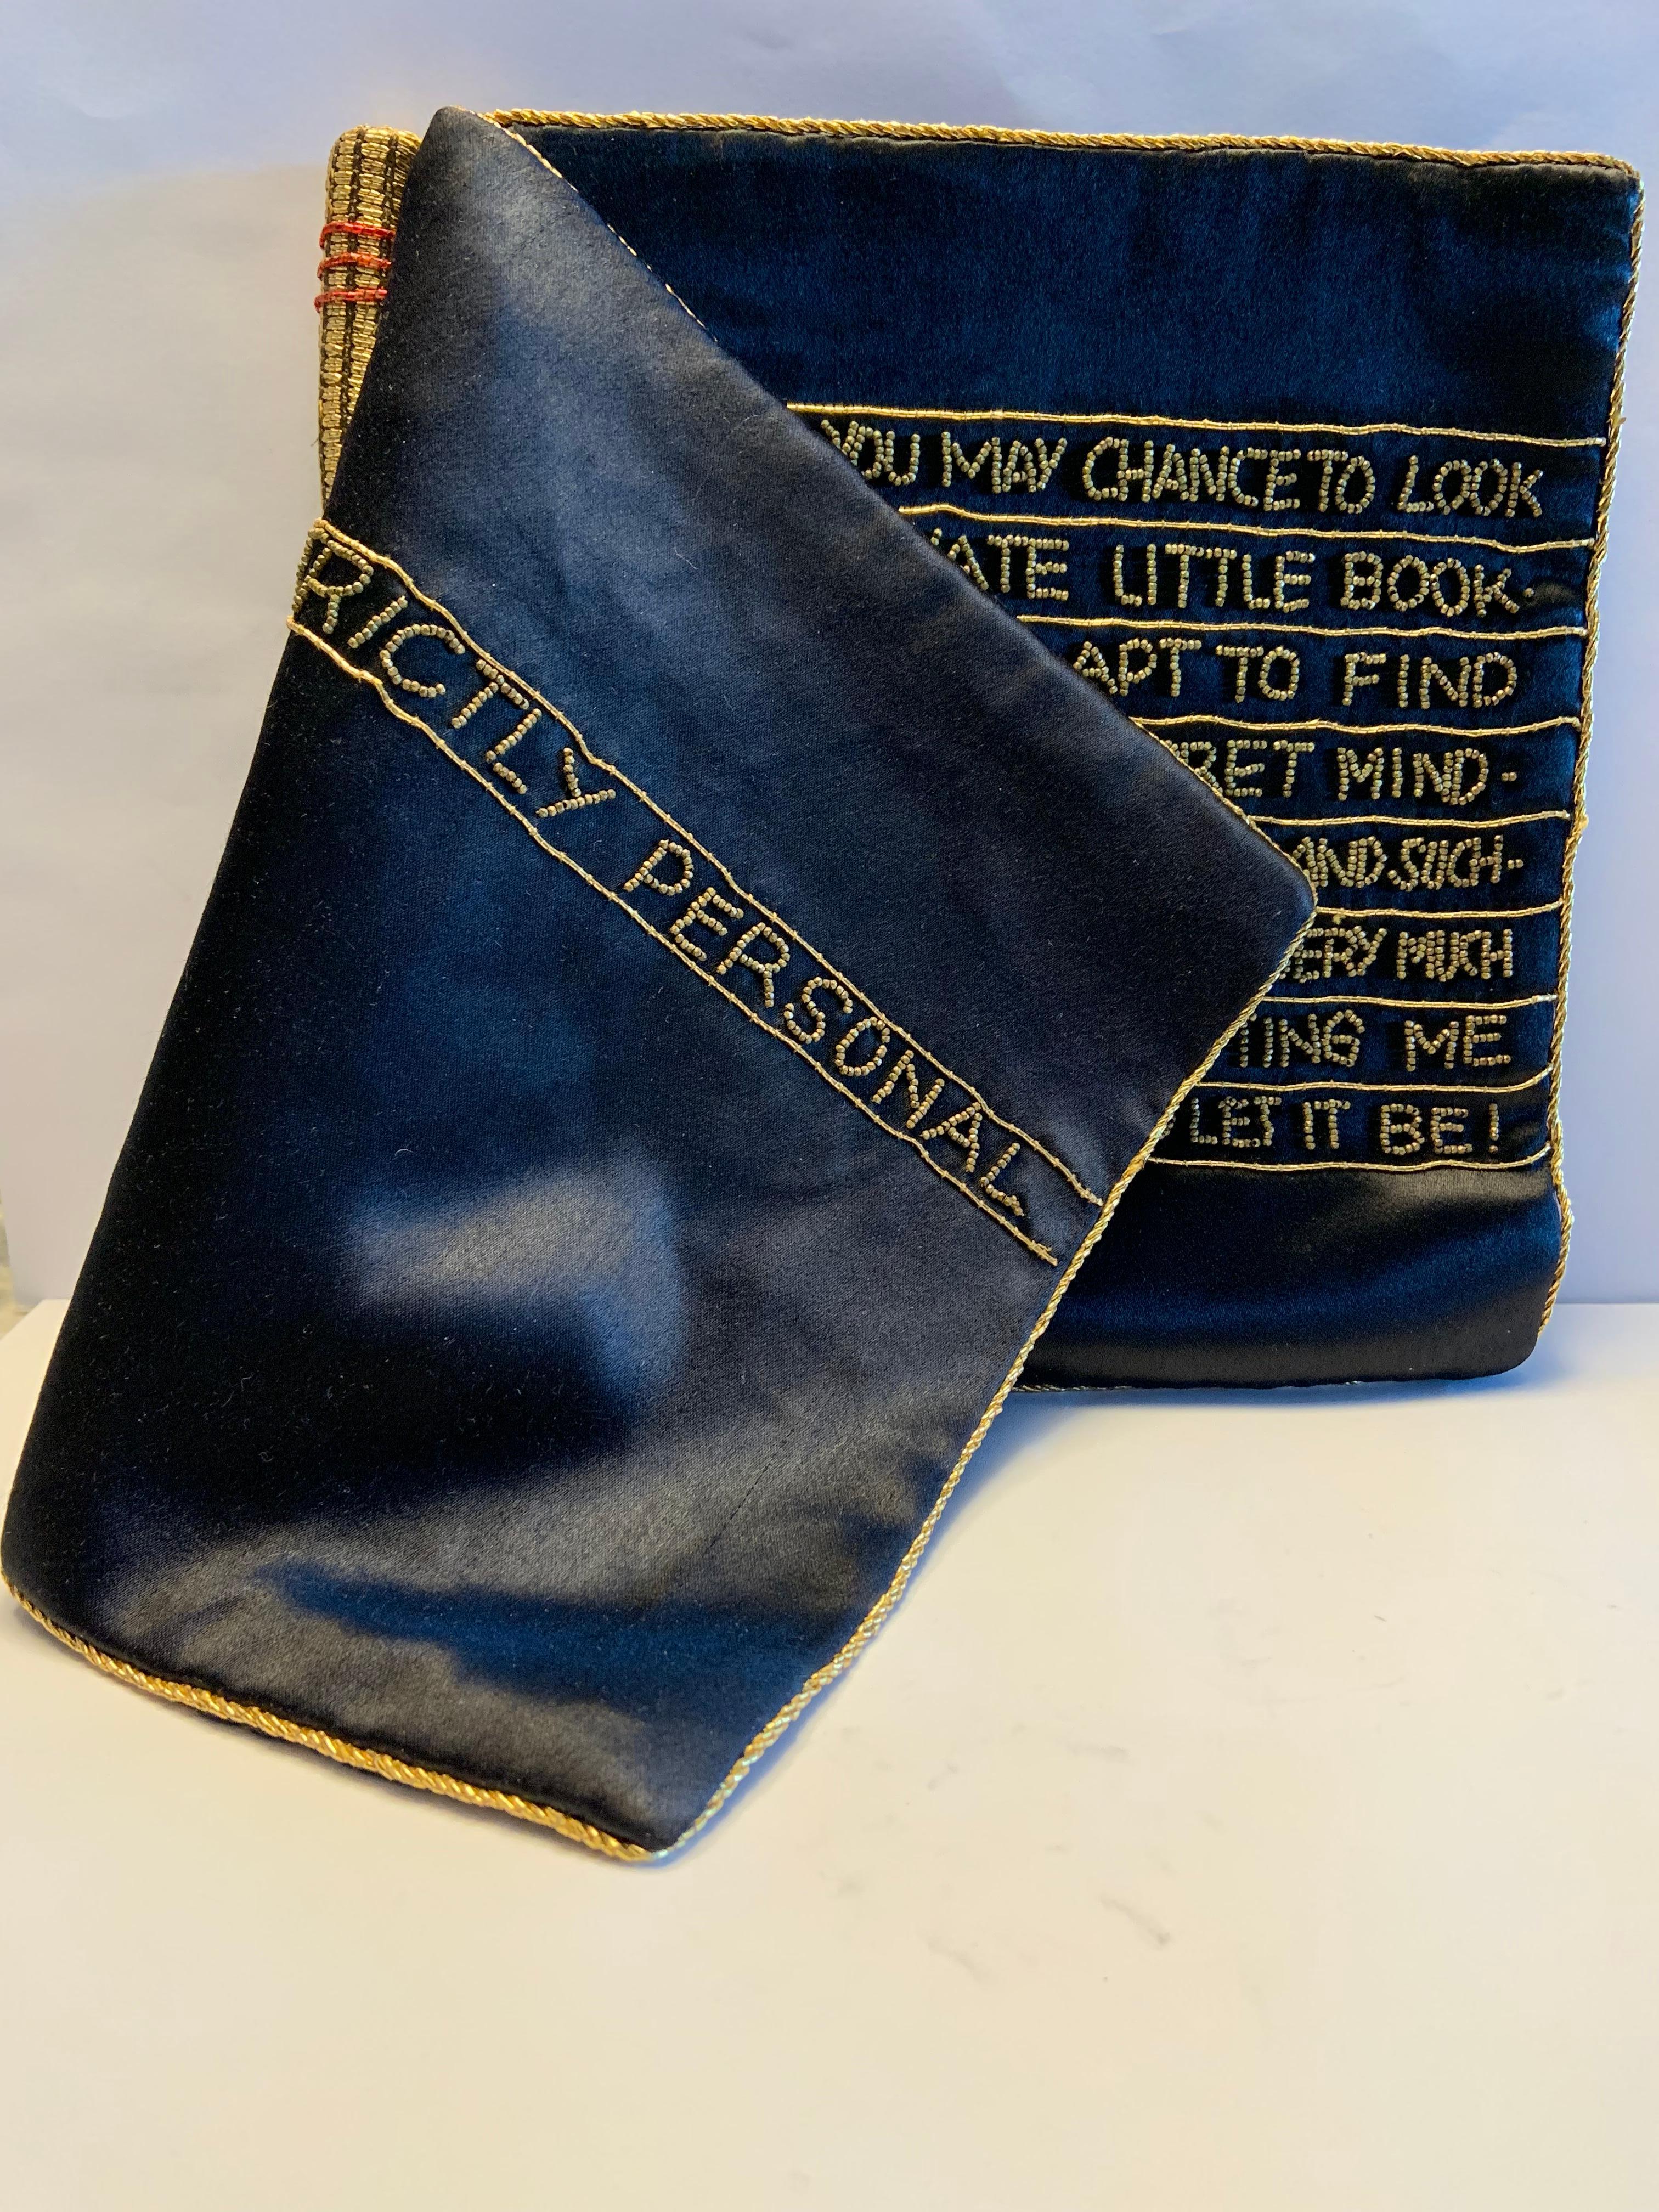  Very witty and a great size for an evening bag, these bags were retailed by high end department stores including Bergdorf Goodman in New York. The left side of the bag is the spine of the book, wrapped in gold metallic braid with red accents. The